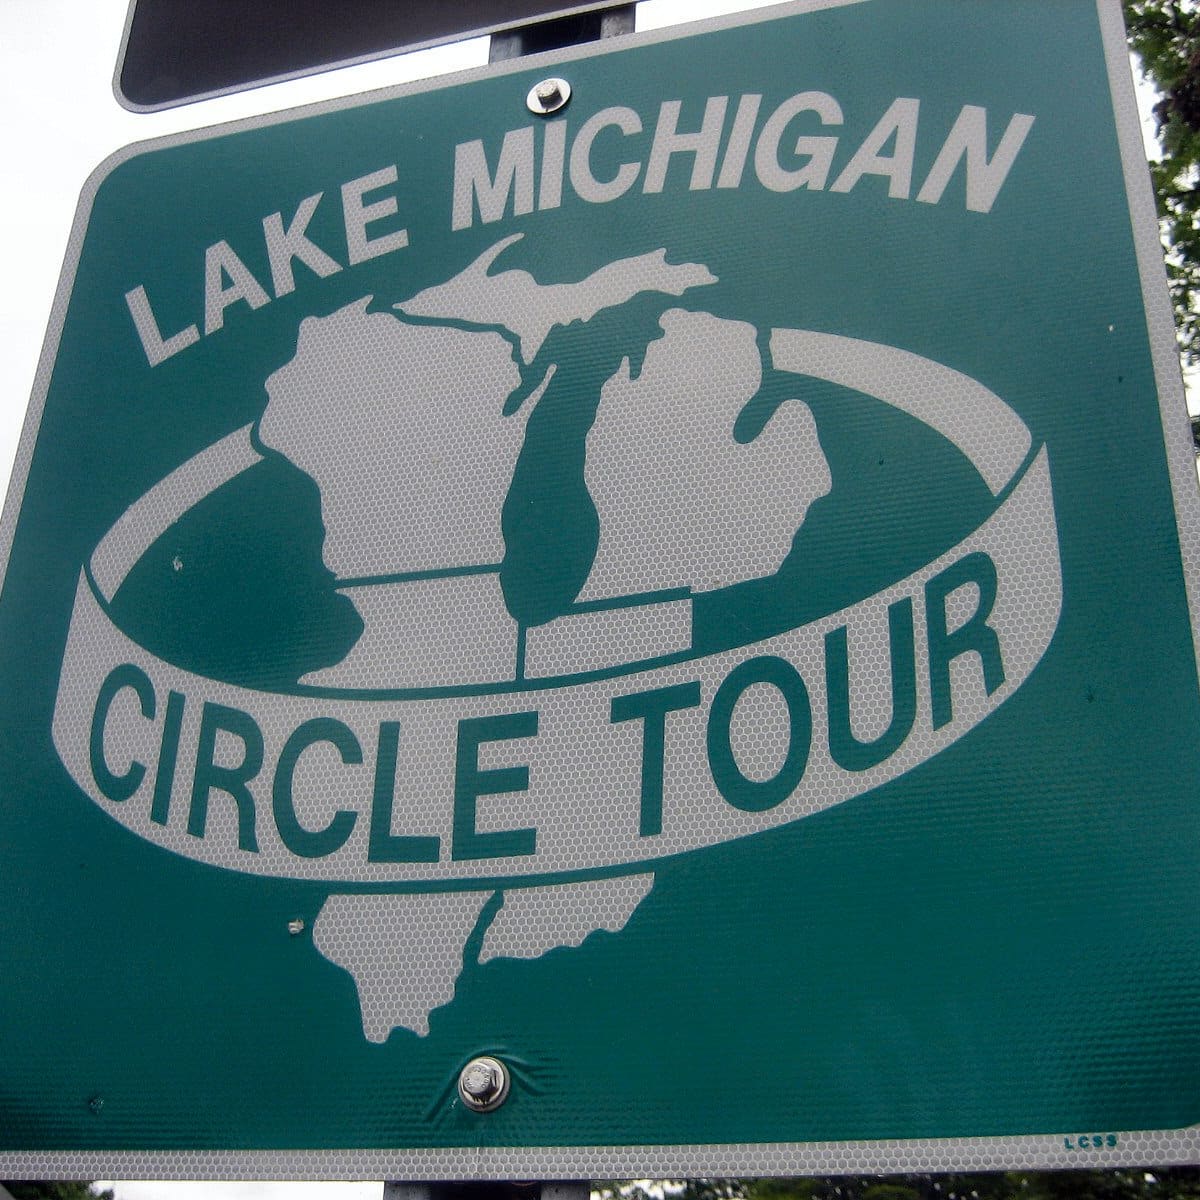 GREAT LAKES MICHIGAN SCENIC CIRCLE TOUR VINYL DECAL STICKER 4in x 4in 